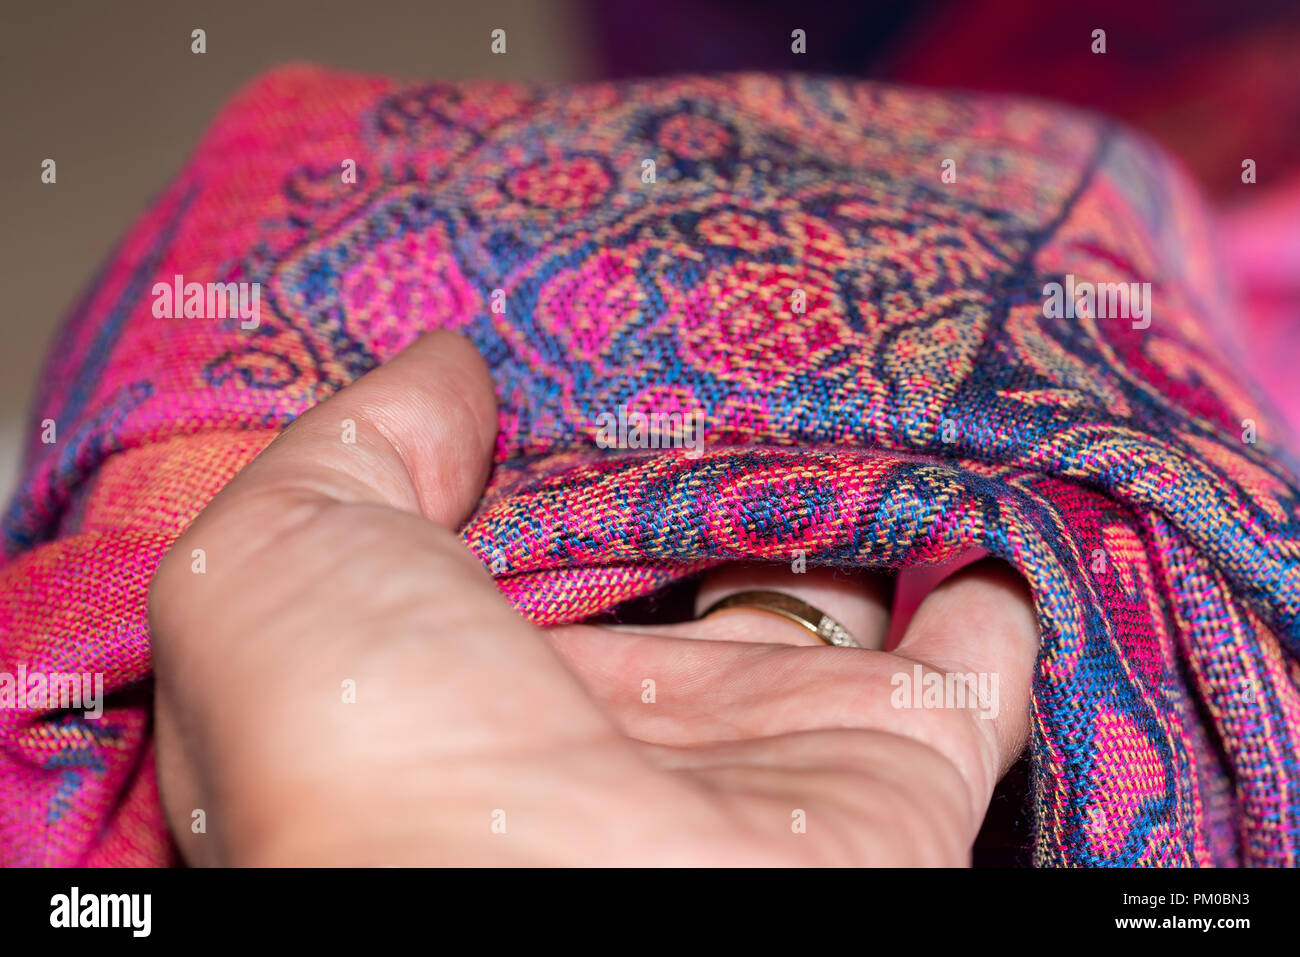 Hand holding a pink and purple original cashmere scarf Stock Photo